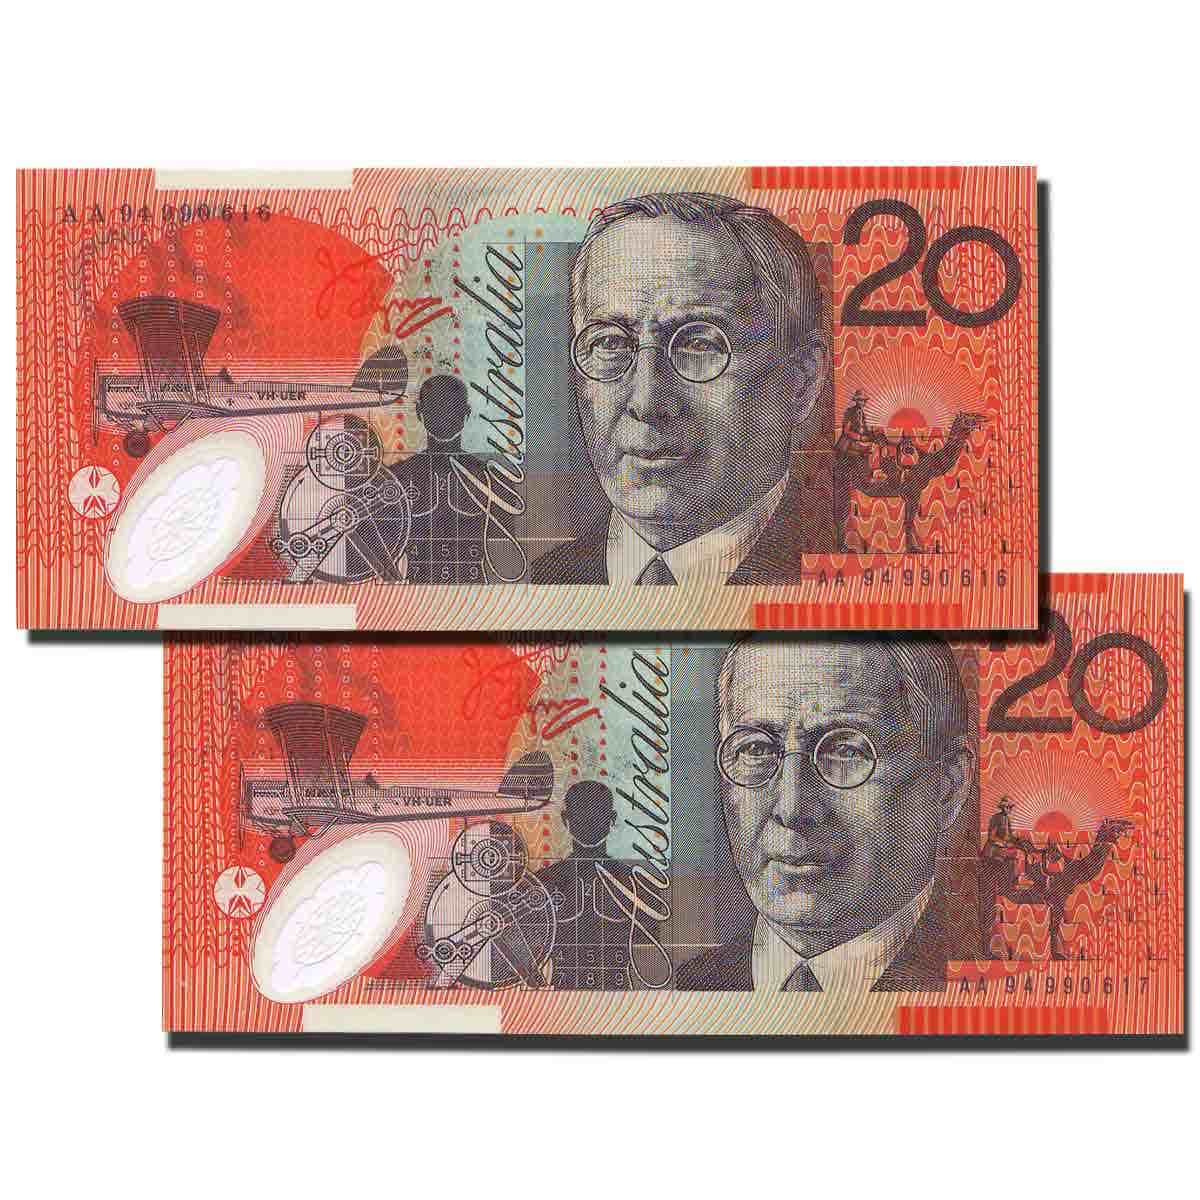 1994 $20 R416aF Fraser/Evans First Prefix AA94 Banknote Consecutive Pair Uncirculated